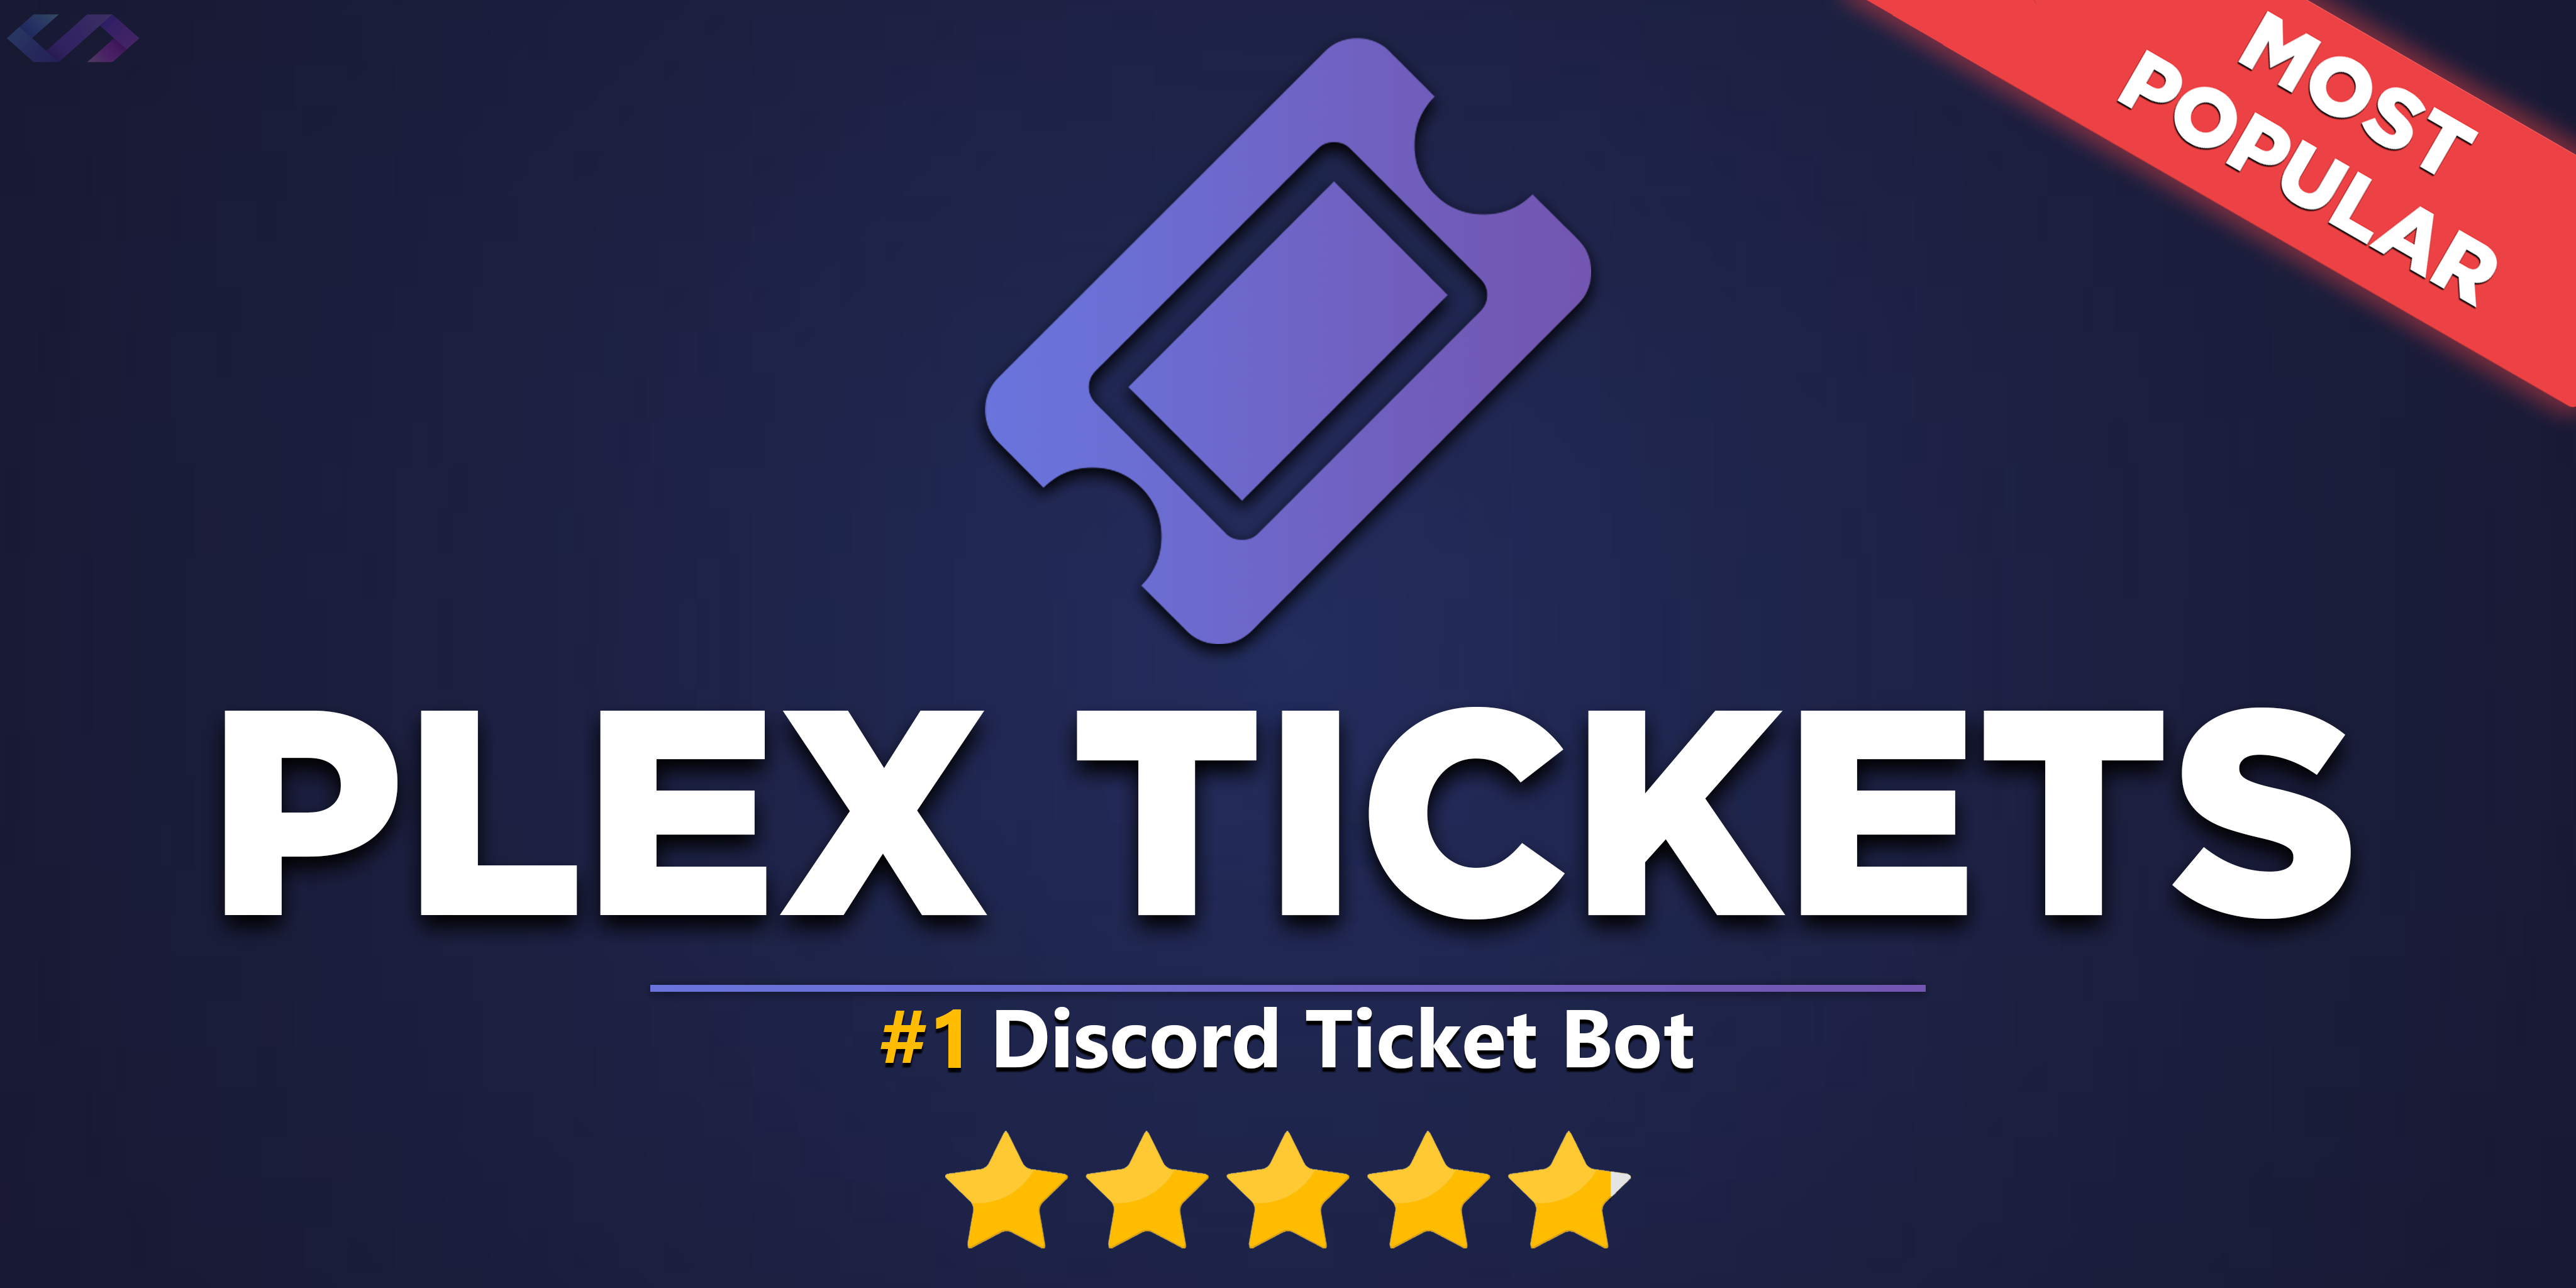 More information about "Plex Tickets Latest Version Cracked"